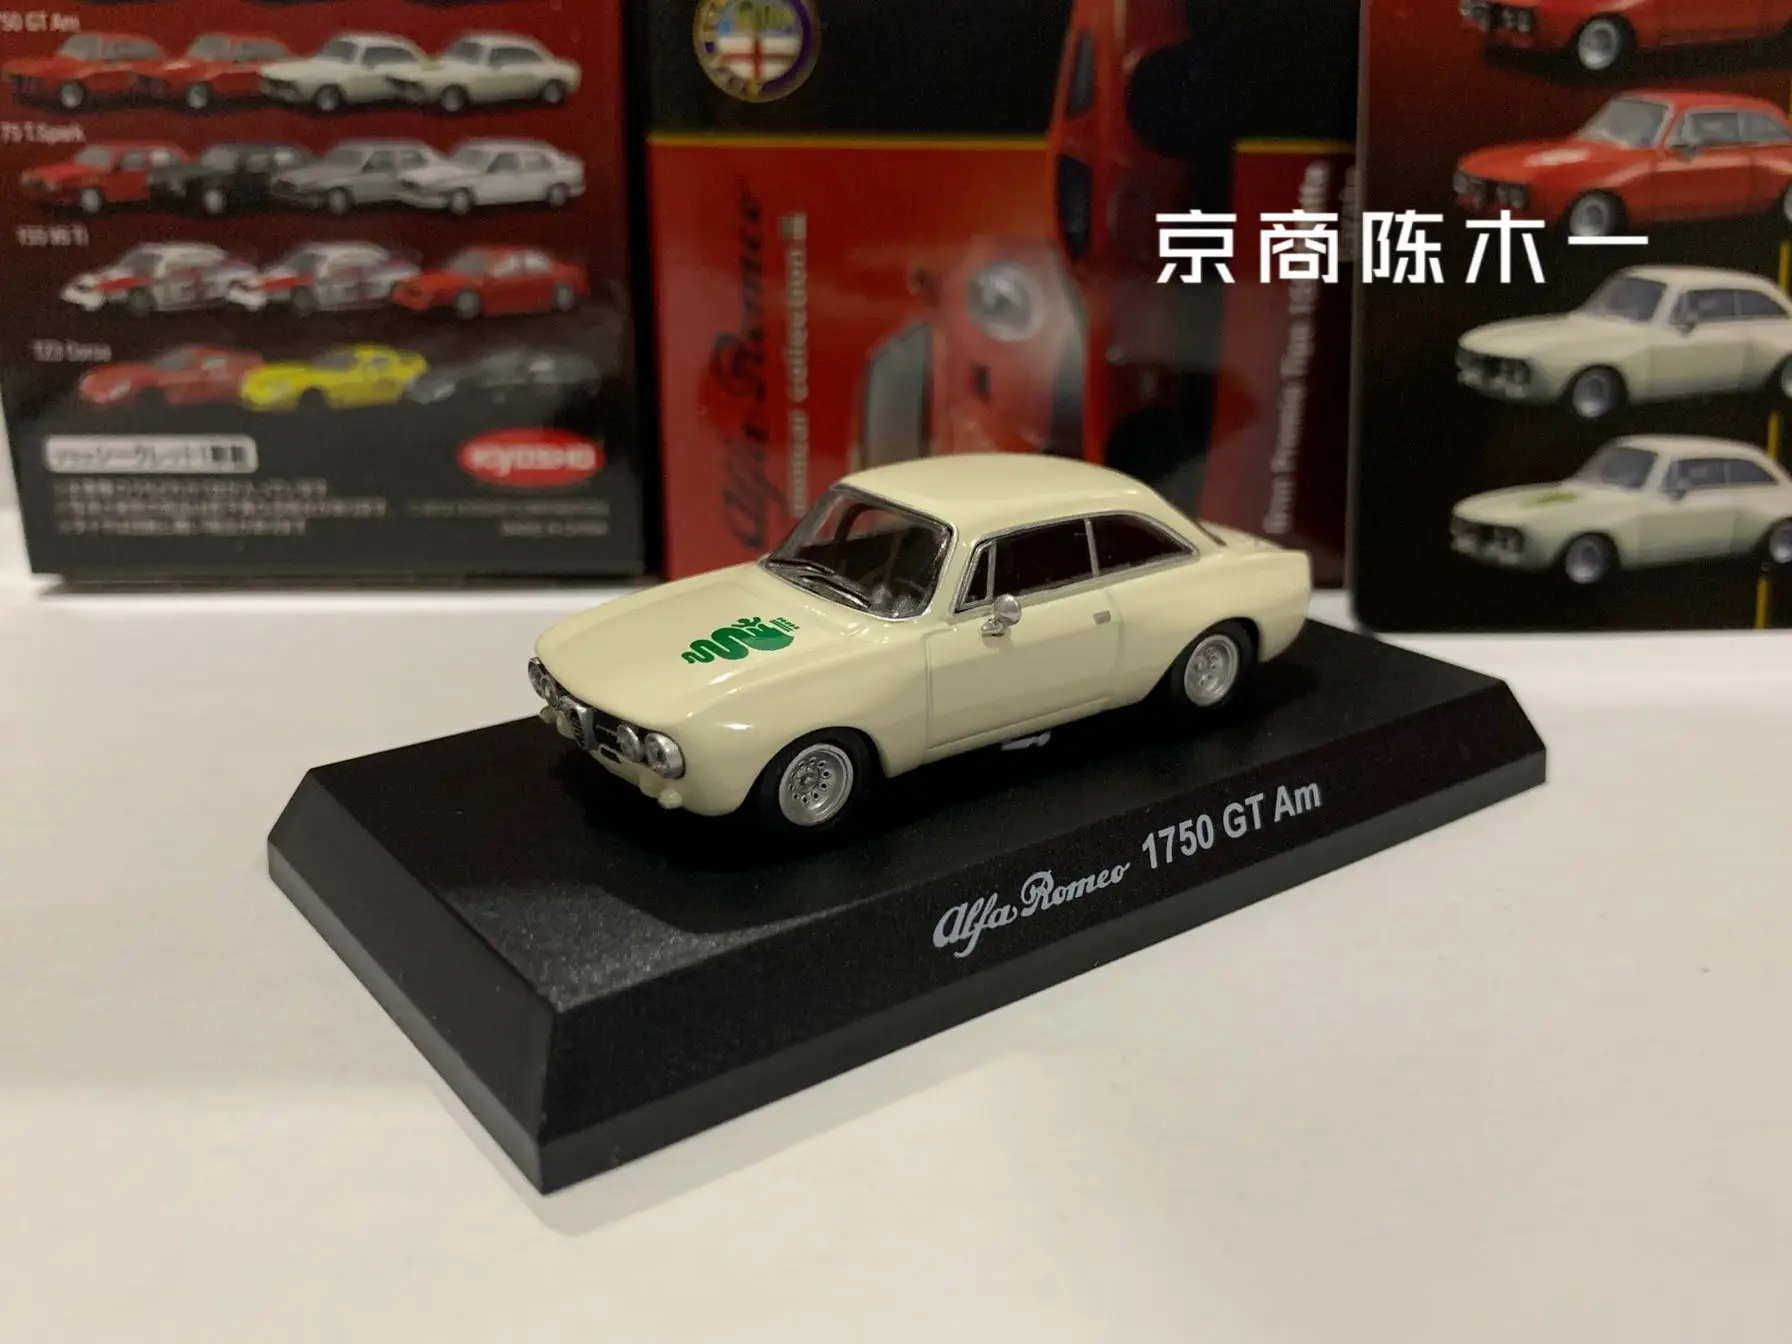 

1/64 KYOSHO Alfa Romeo 1750 GT Am LM F1 RACING Collection of die-cast alloy car decoration model toys